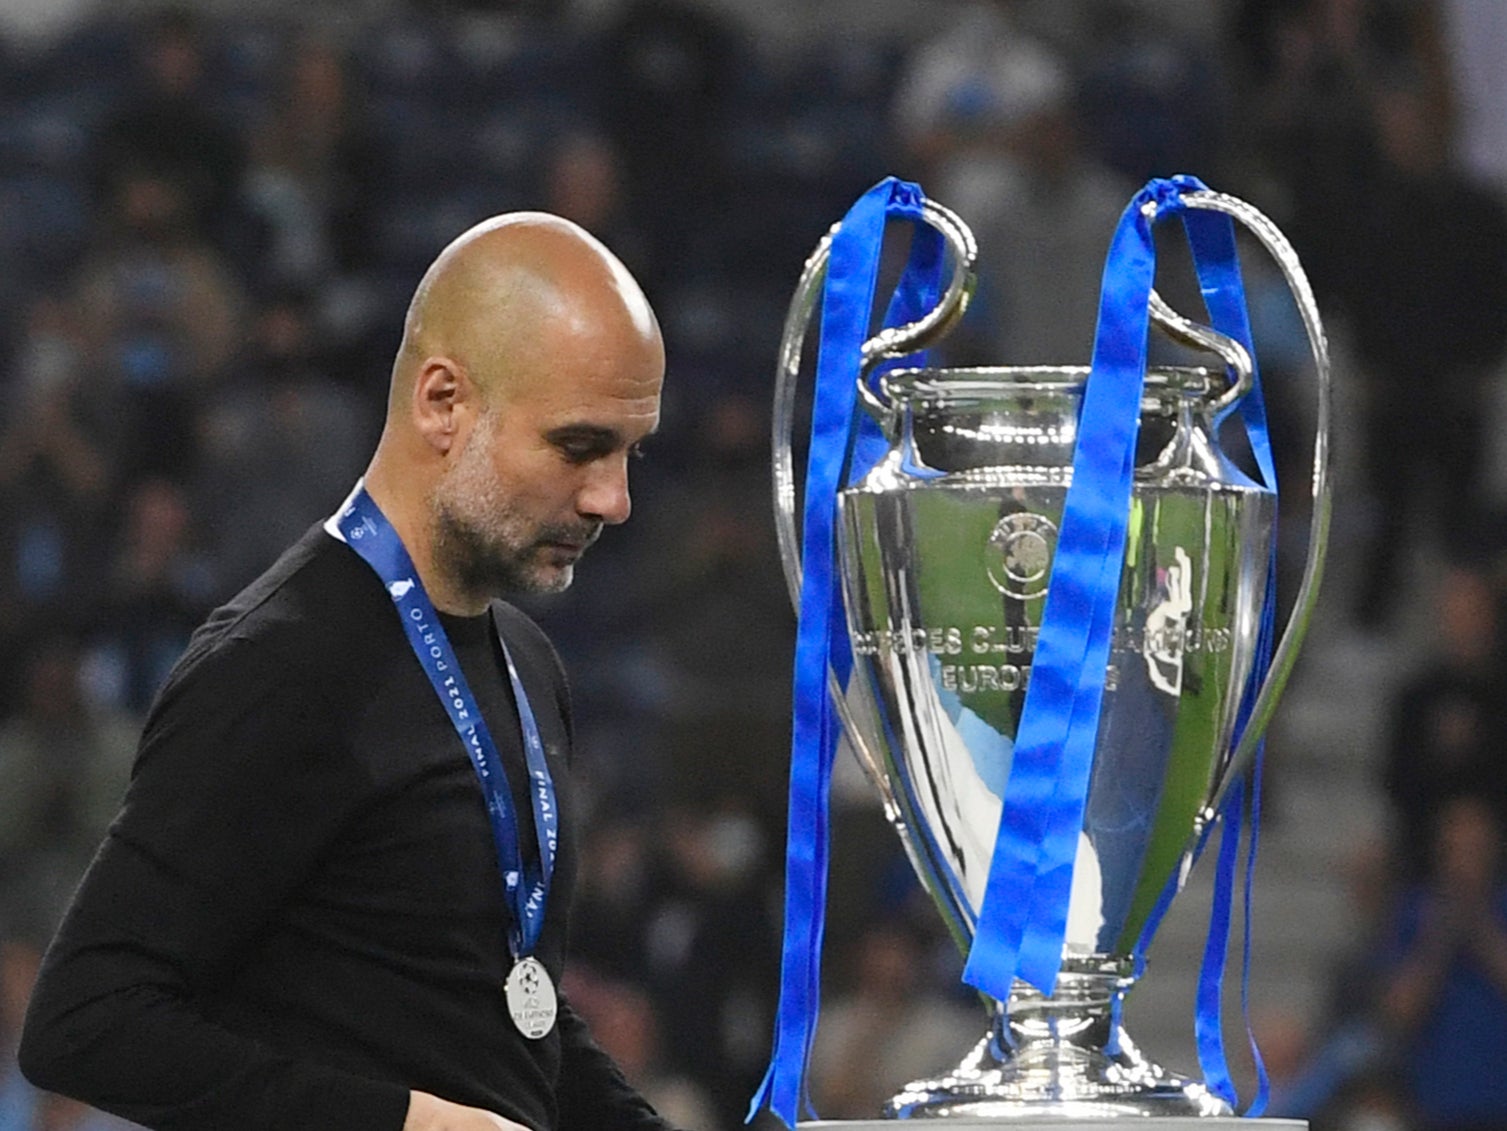 Pep Guardiola’s bizarre team selection shifted the dynamic of the final